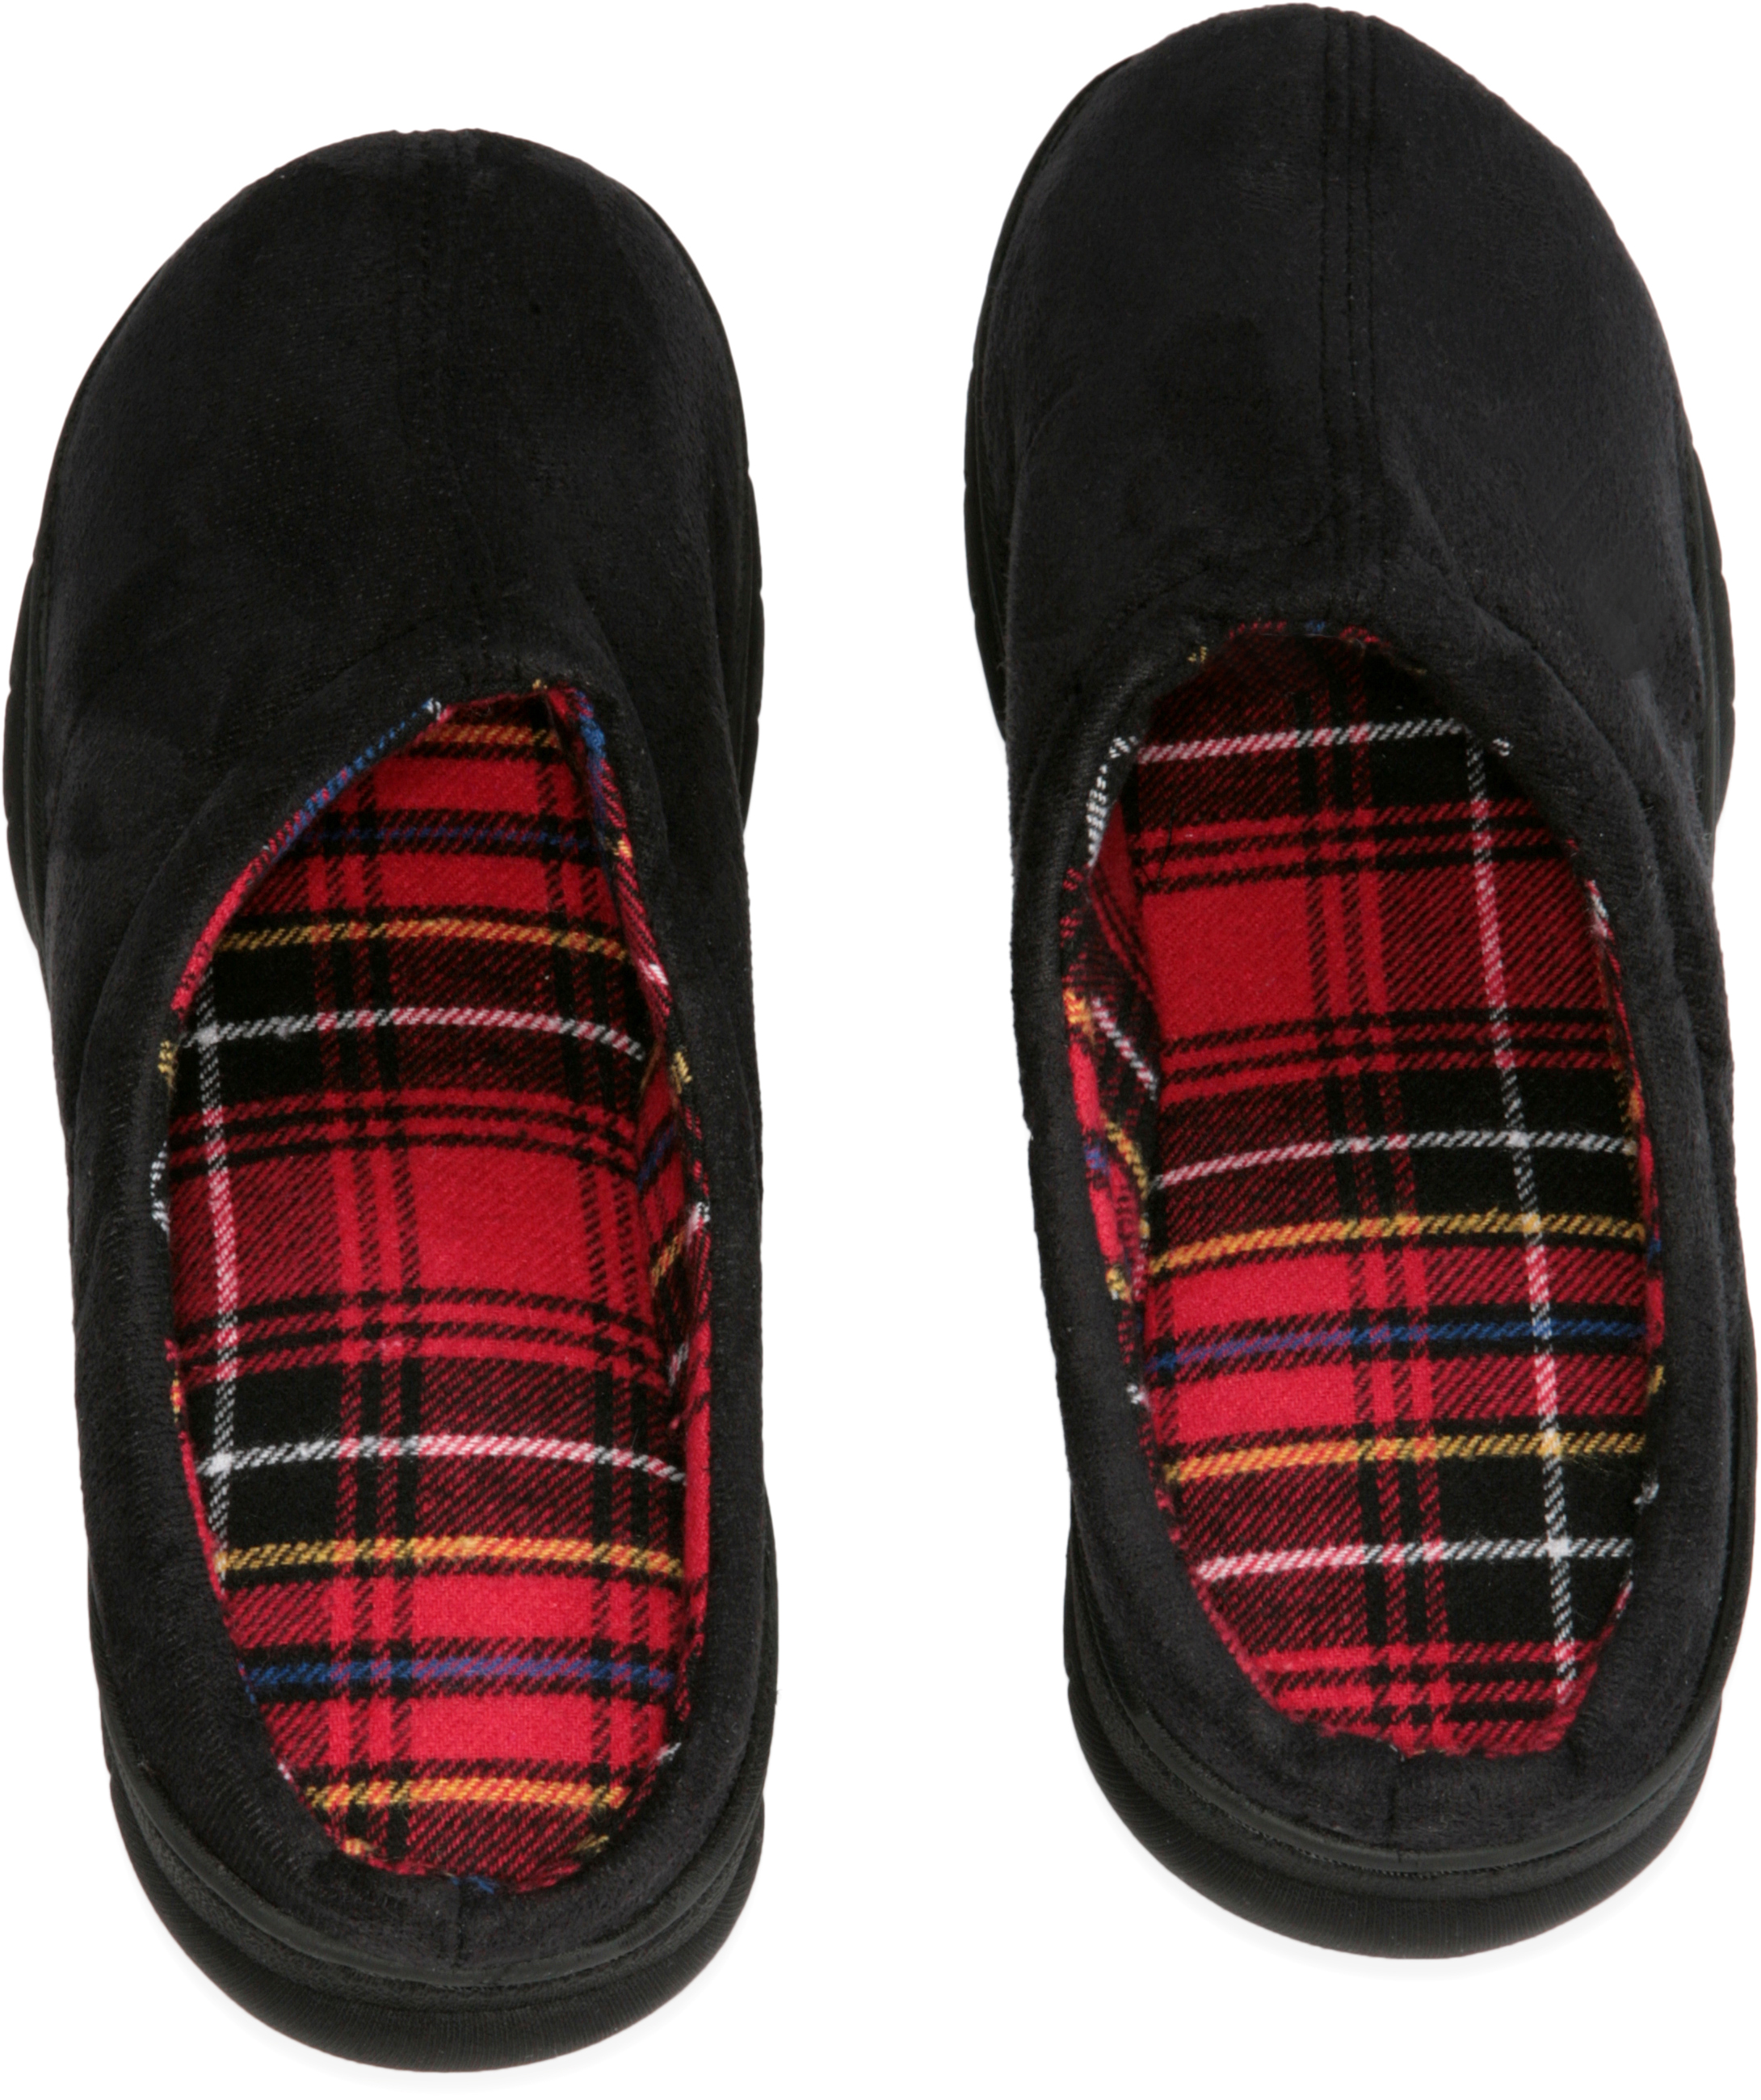 Deluxe Comfort Men's Memory Foam Slipper, Size 13-14 – Suede Vamp Checkered Lining – Memory Foam Insole – Strong TPR Outsole – Men's Slippers, Black Suede - image 3 of 5